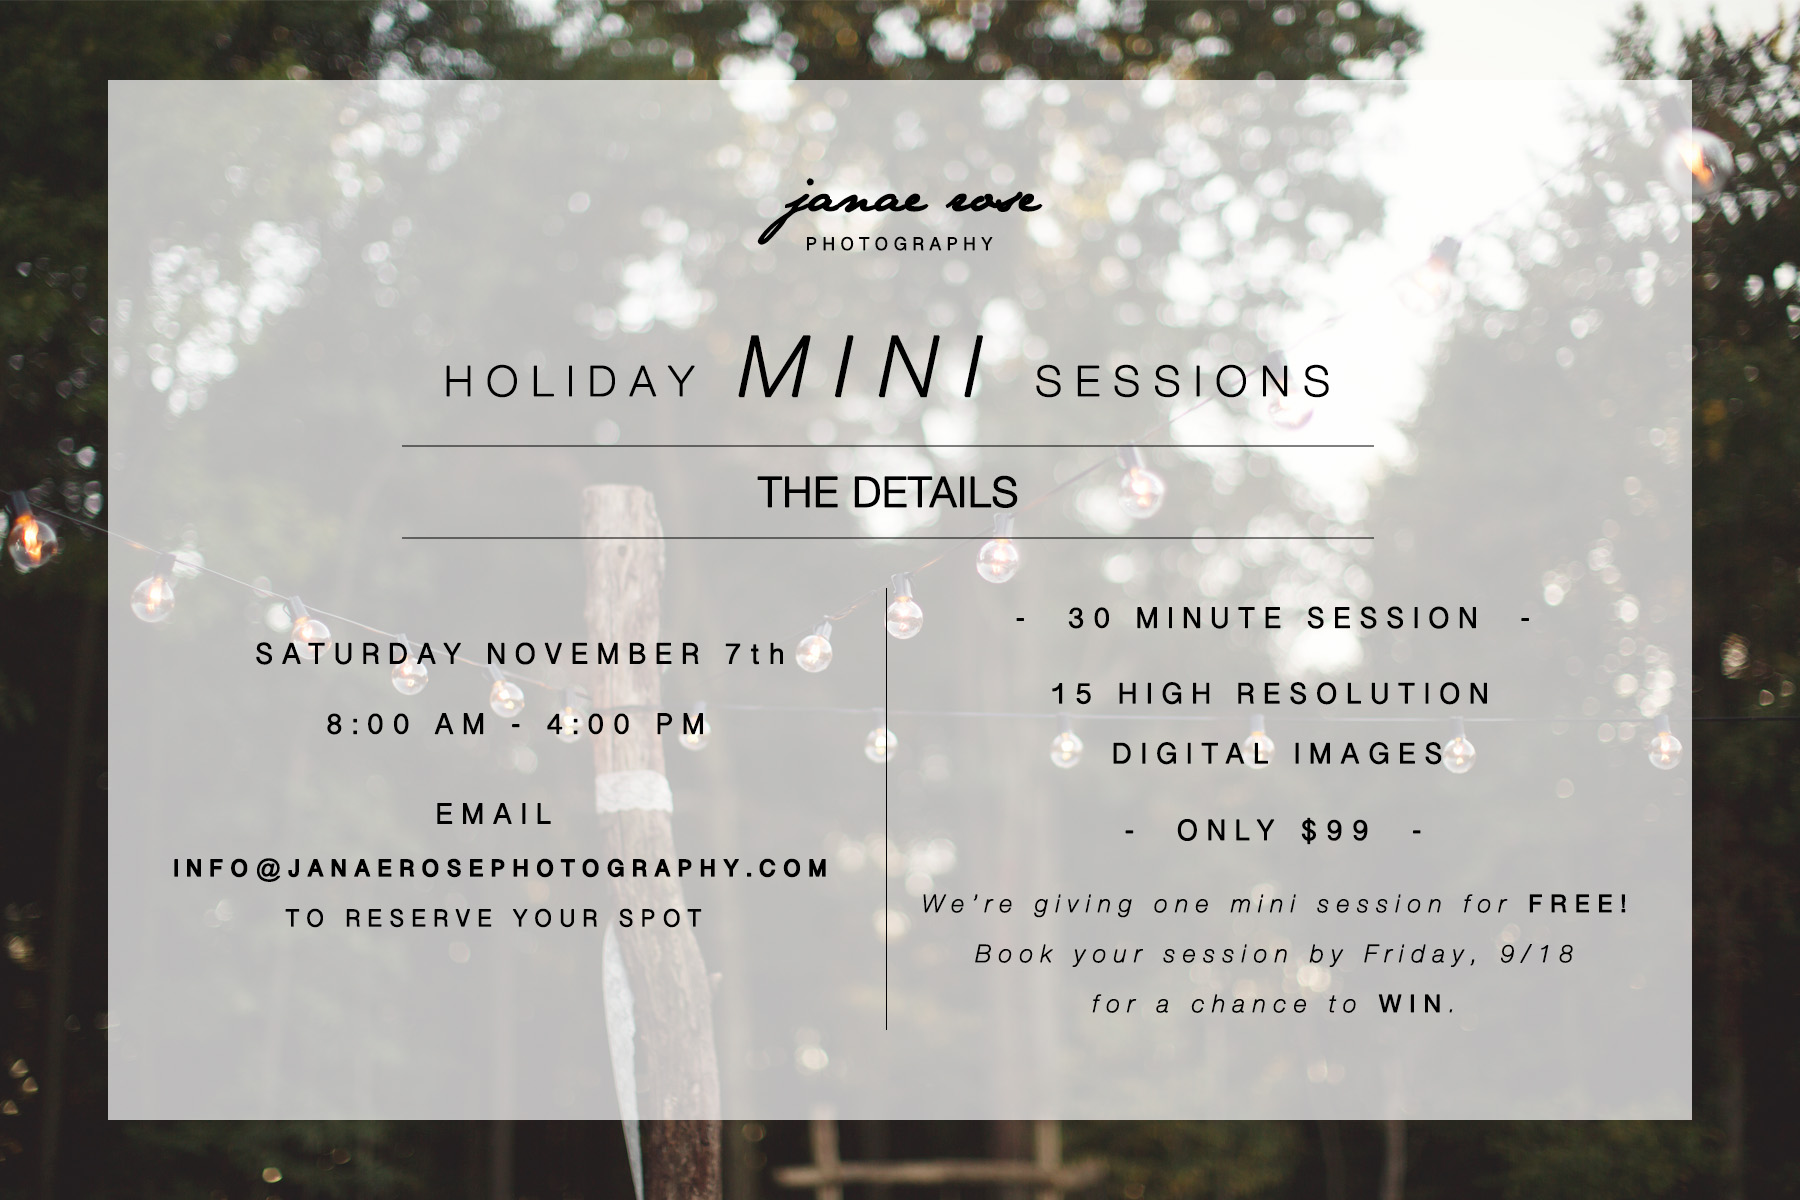 HOLIDAY MINI SESSIONS